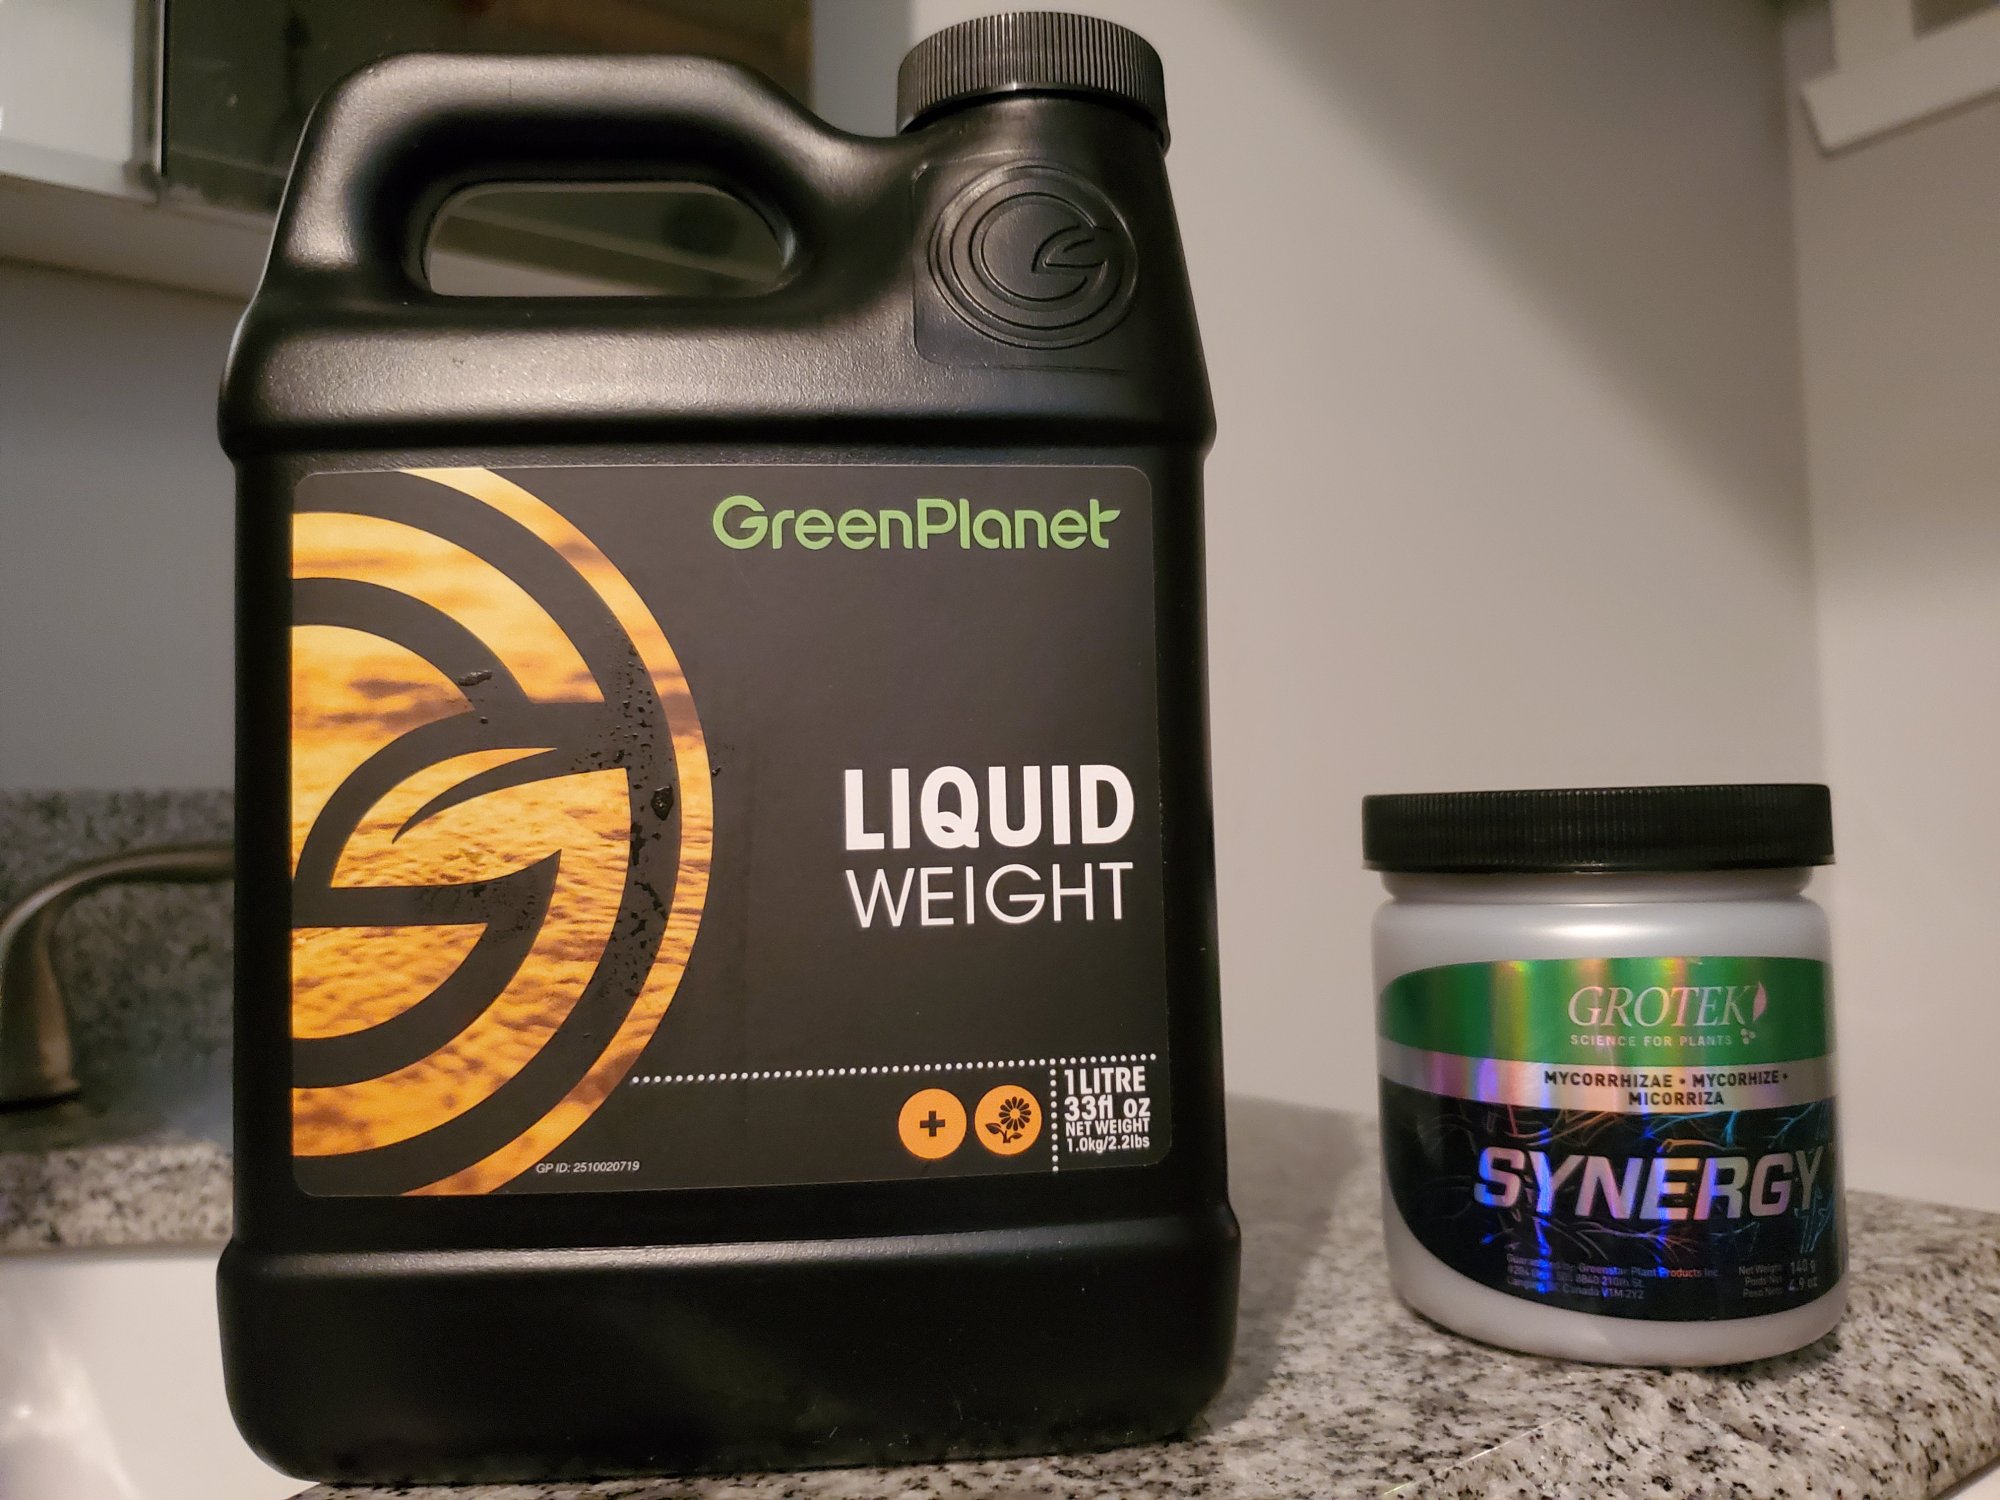 Grotek synergy and green planet water weight